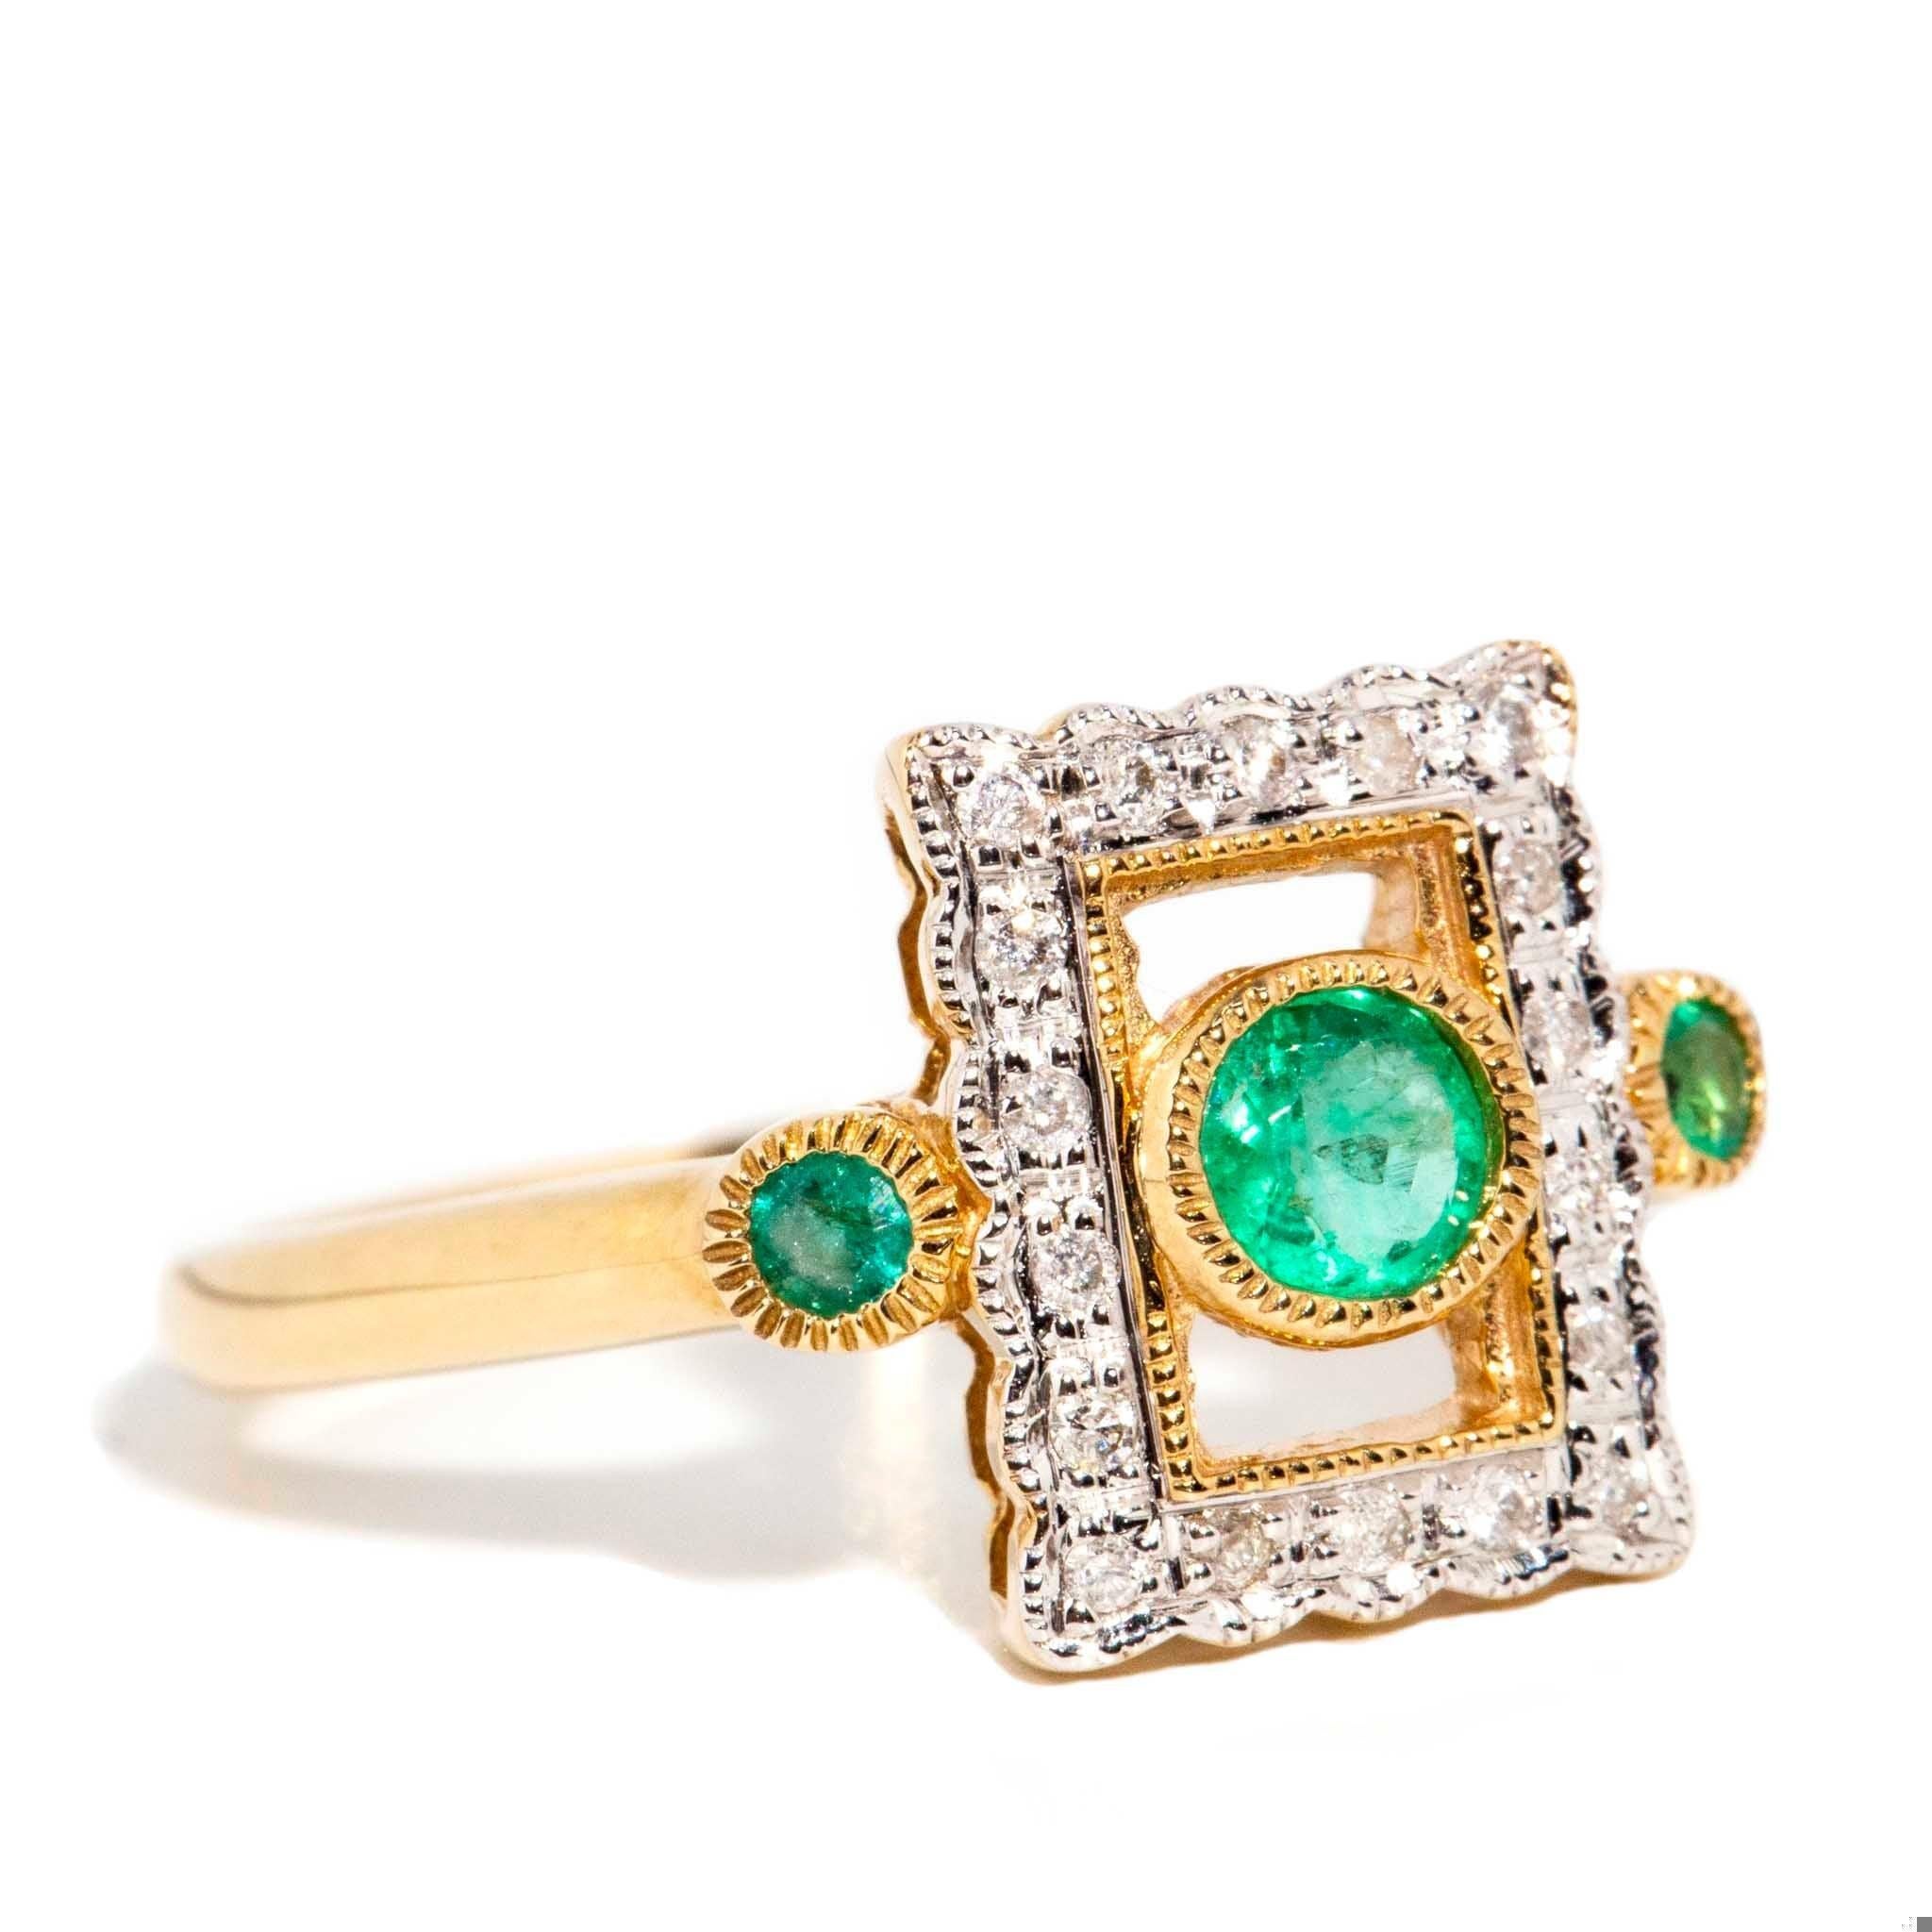 A delicate lace frame of diamond embellished gold presents a gorgeous emerald that shines bright with intensity matched only by the emeralds buttressed at her side. She is the 9 carat gold Francie Ring, made to capture the profound sweet fragility